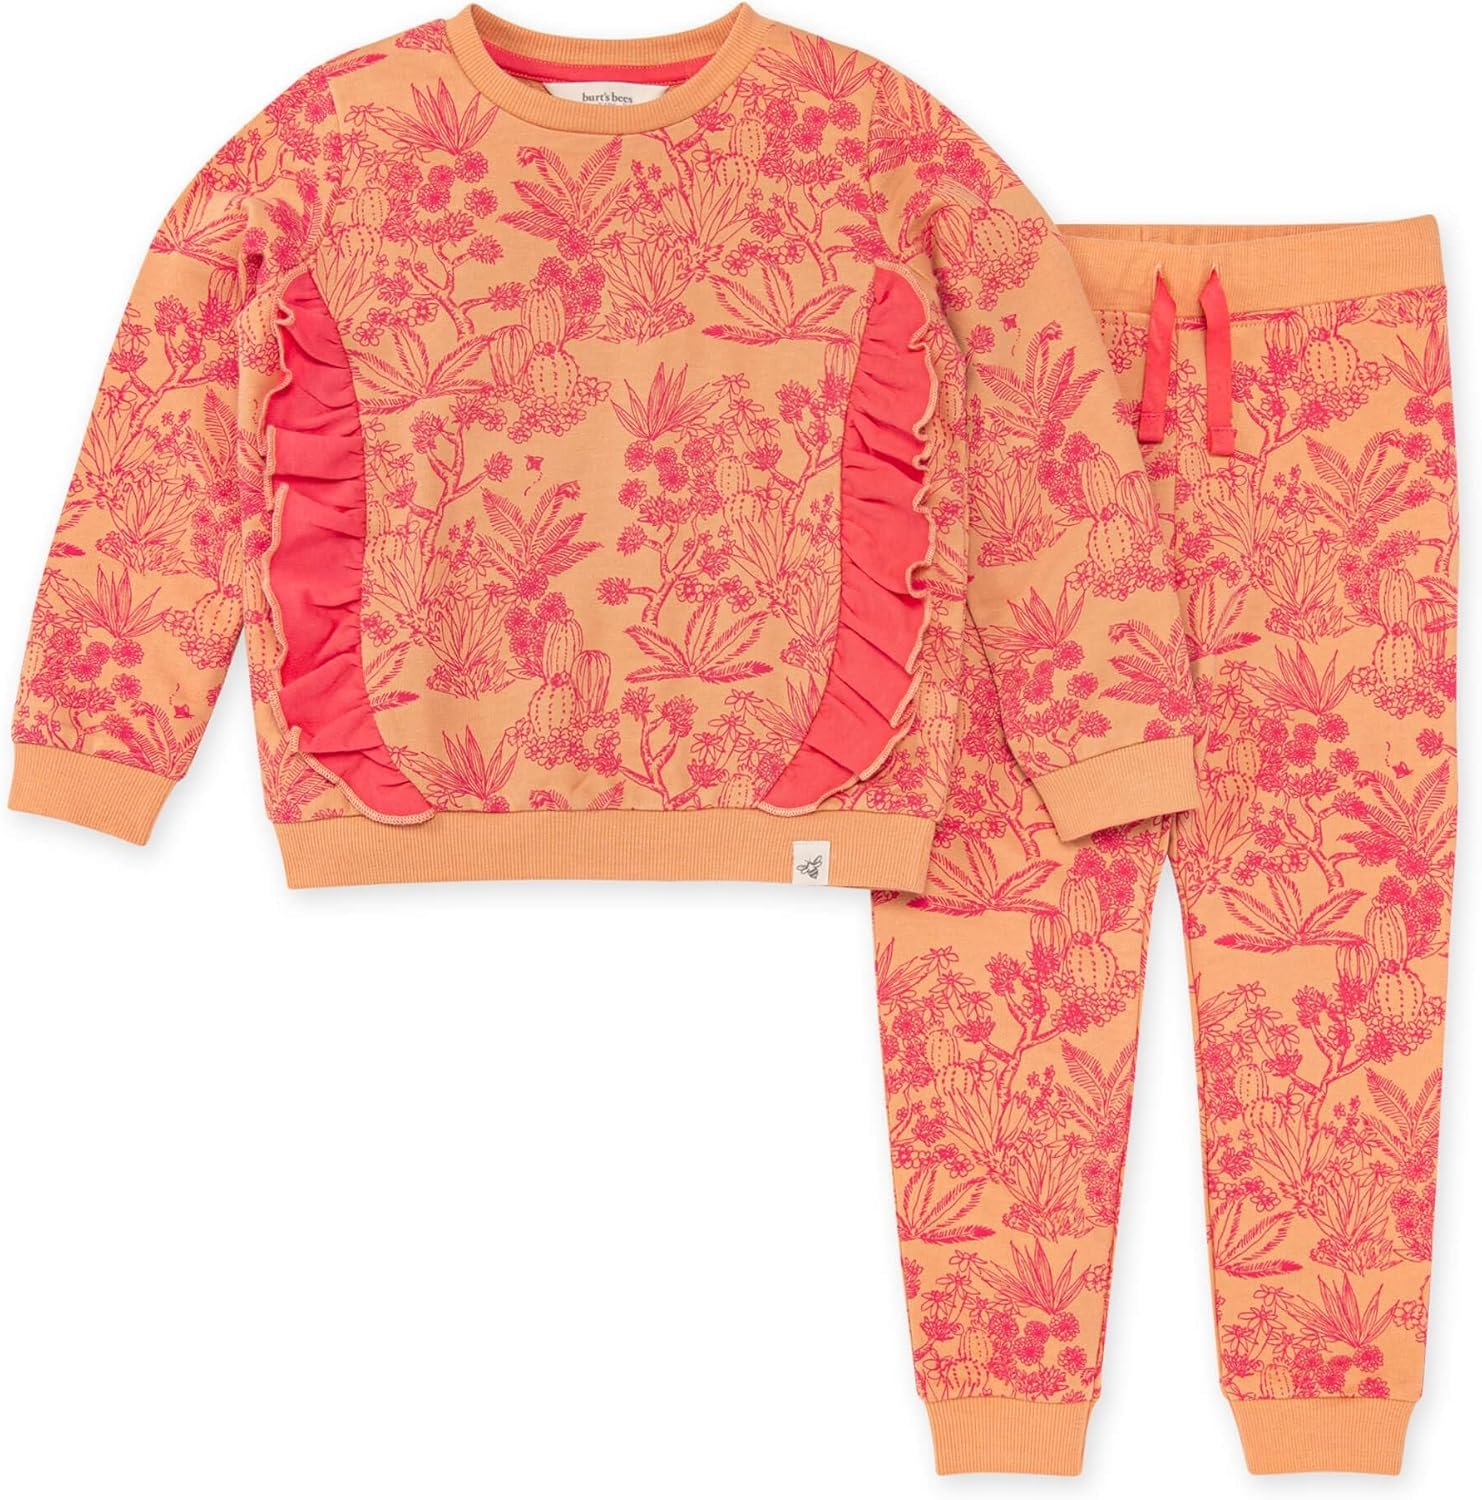 Burt’s Bees Baby Girls’ Top and Pant Set Review